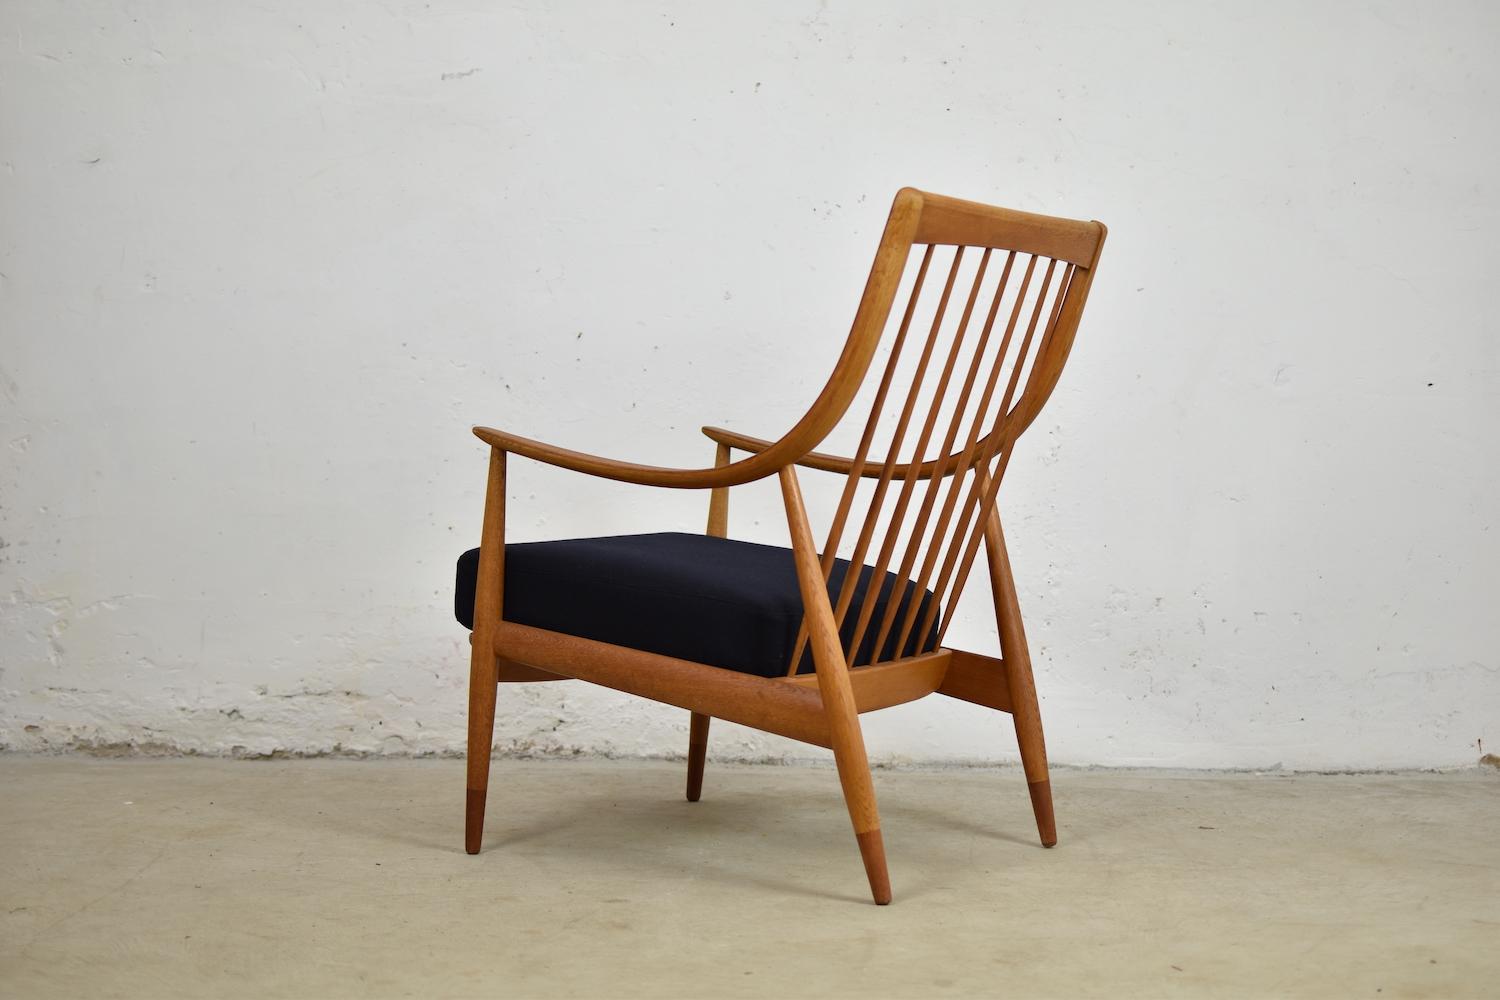 Lounge chair by Peter Hvidt and Orla Mølgaard Nielsen for France & Søn, Denmark, 1953. This chair features an oak and teak frame with freshly reupholstered wool cushions by Stephan Schneider. Nice curved armrests and a spindle backrest!